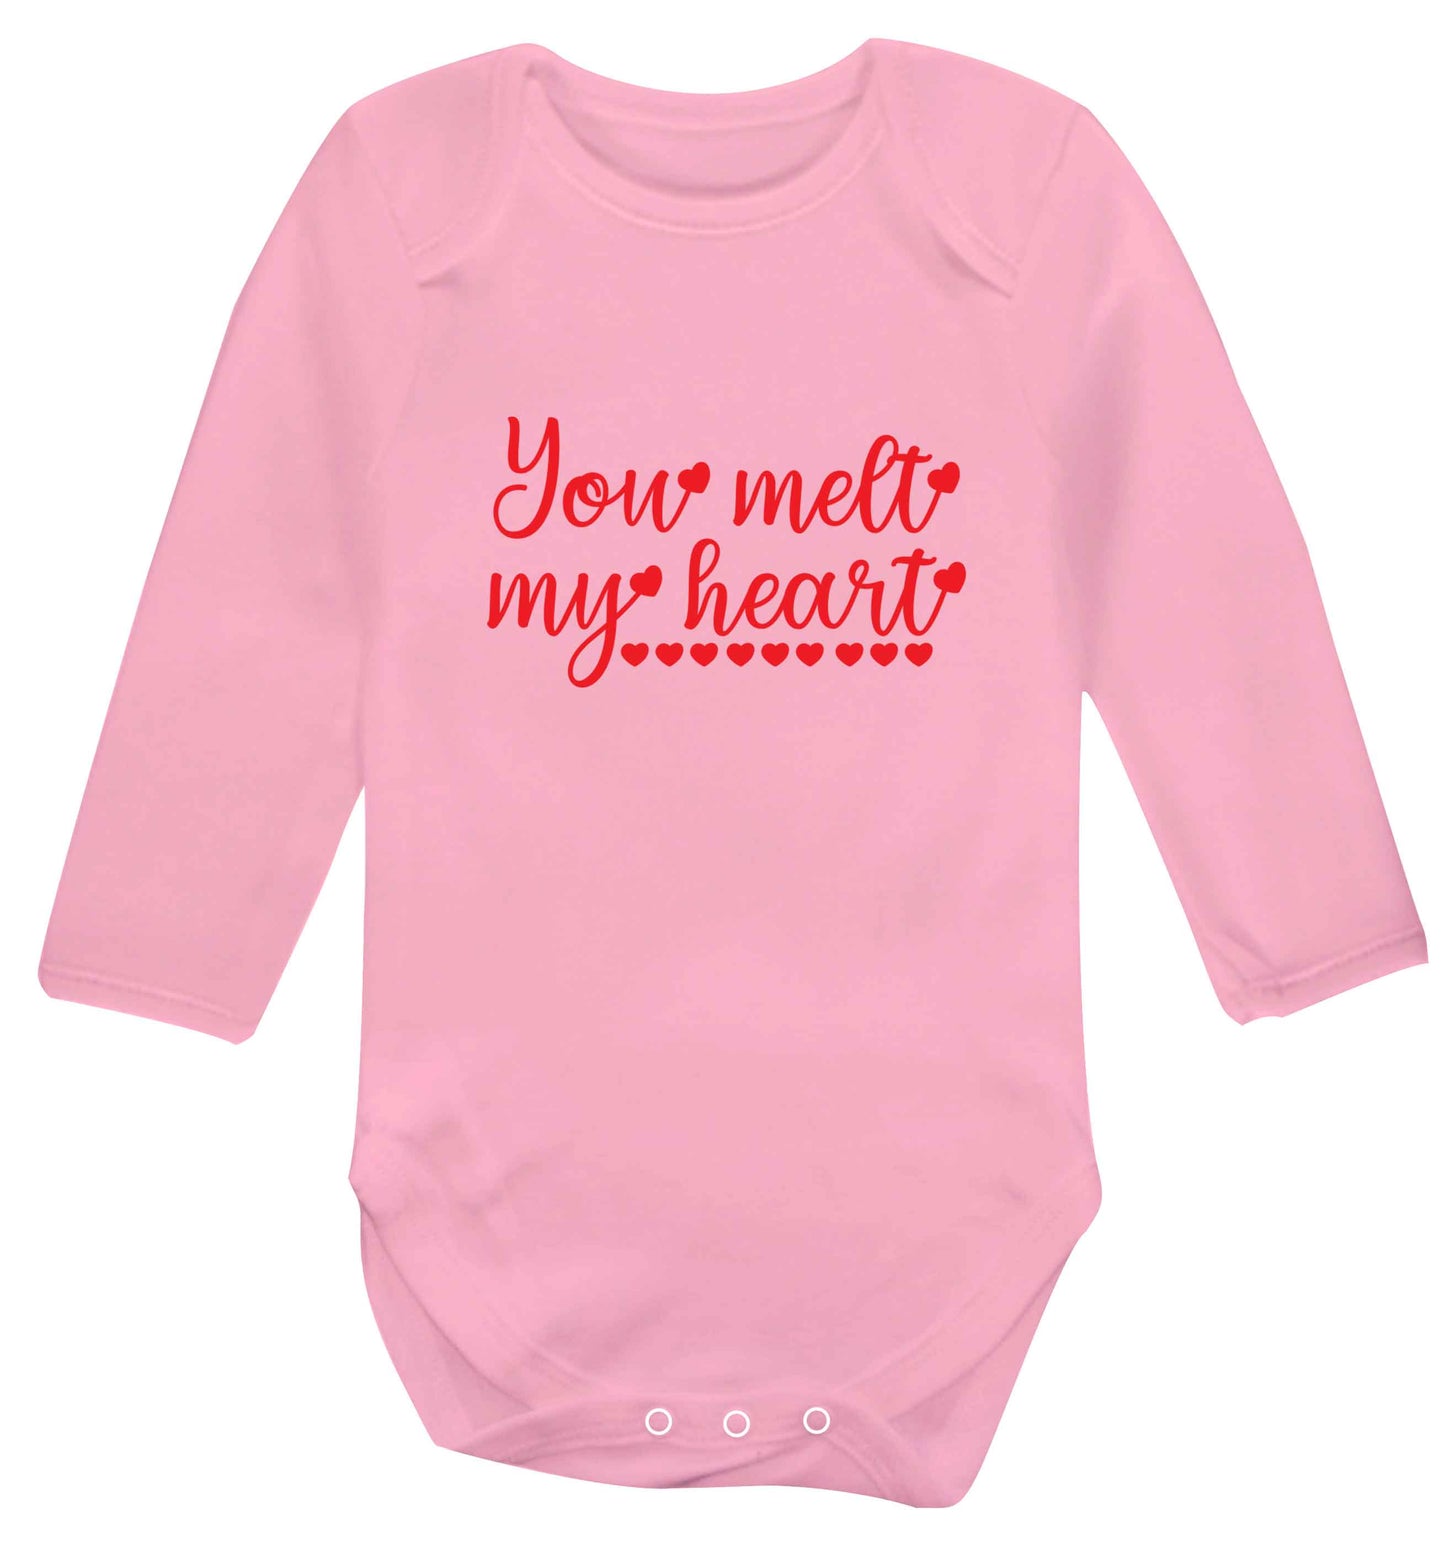 You melt my heart baby vest long sleeved pale pink 6-12 months